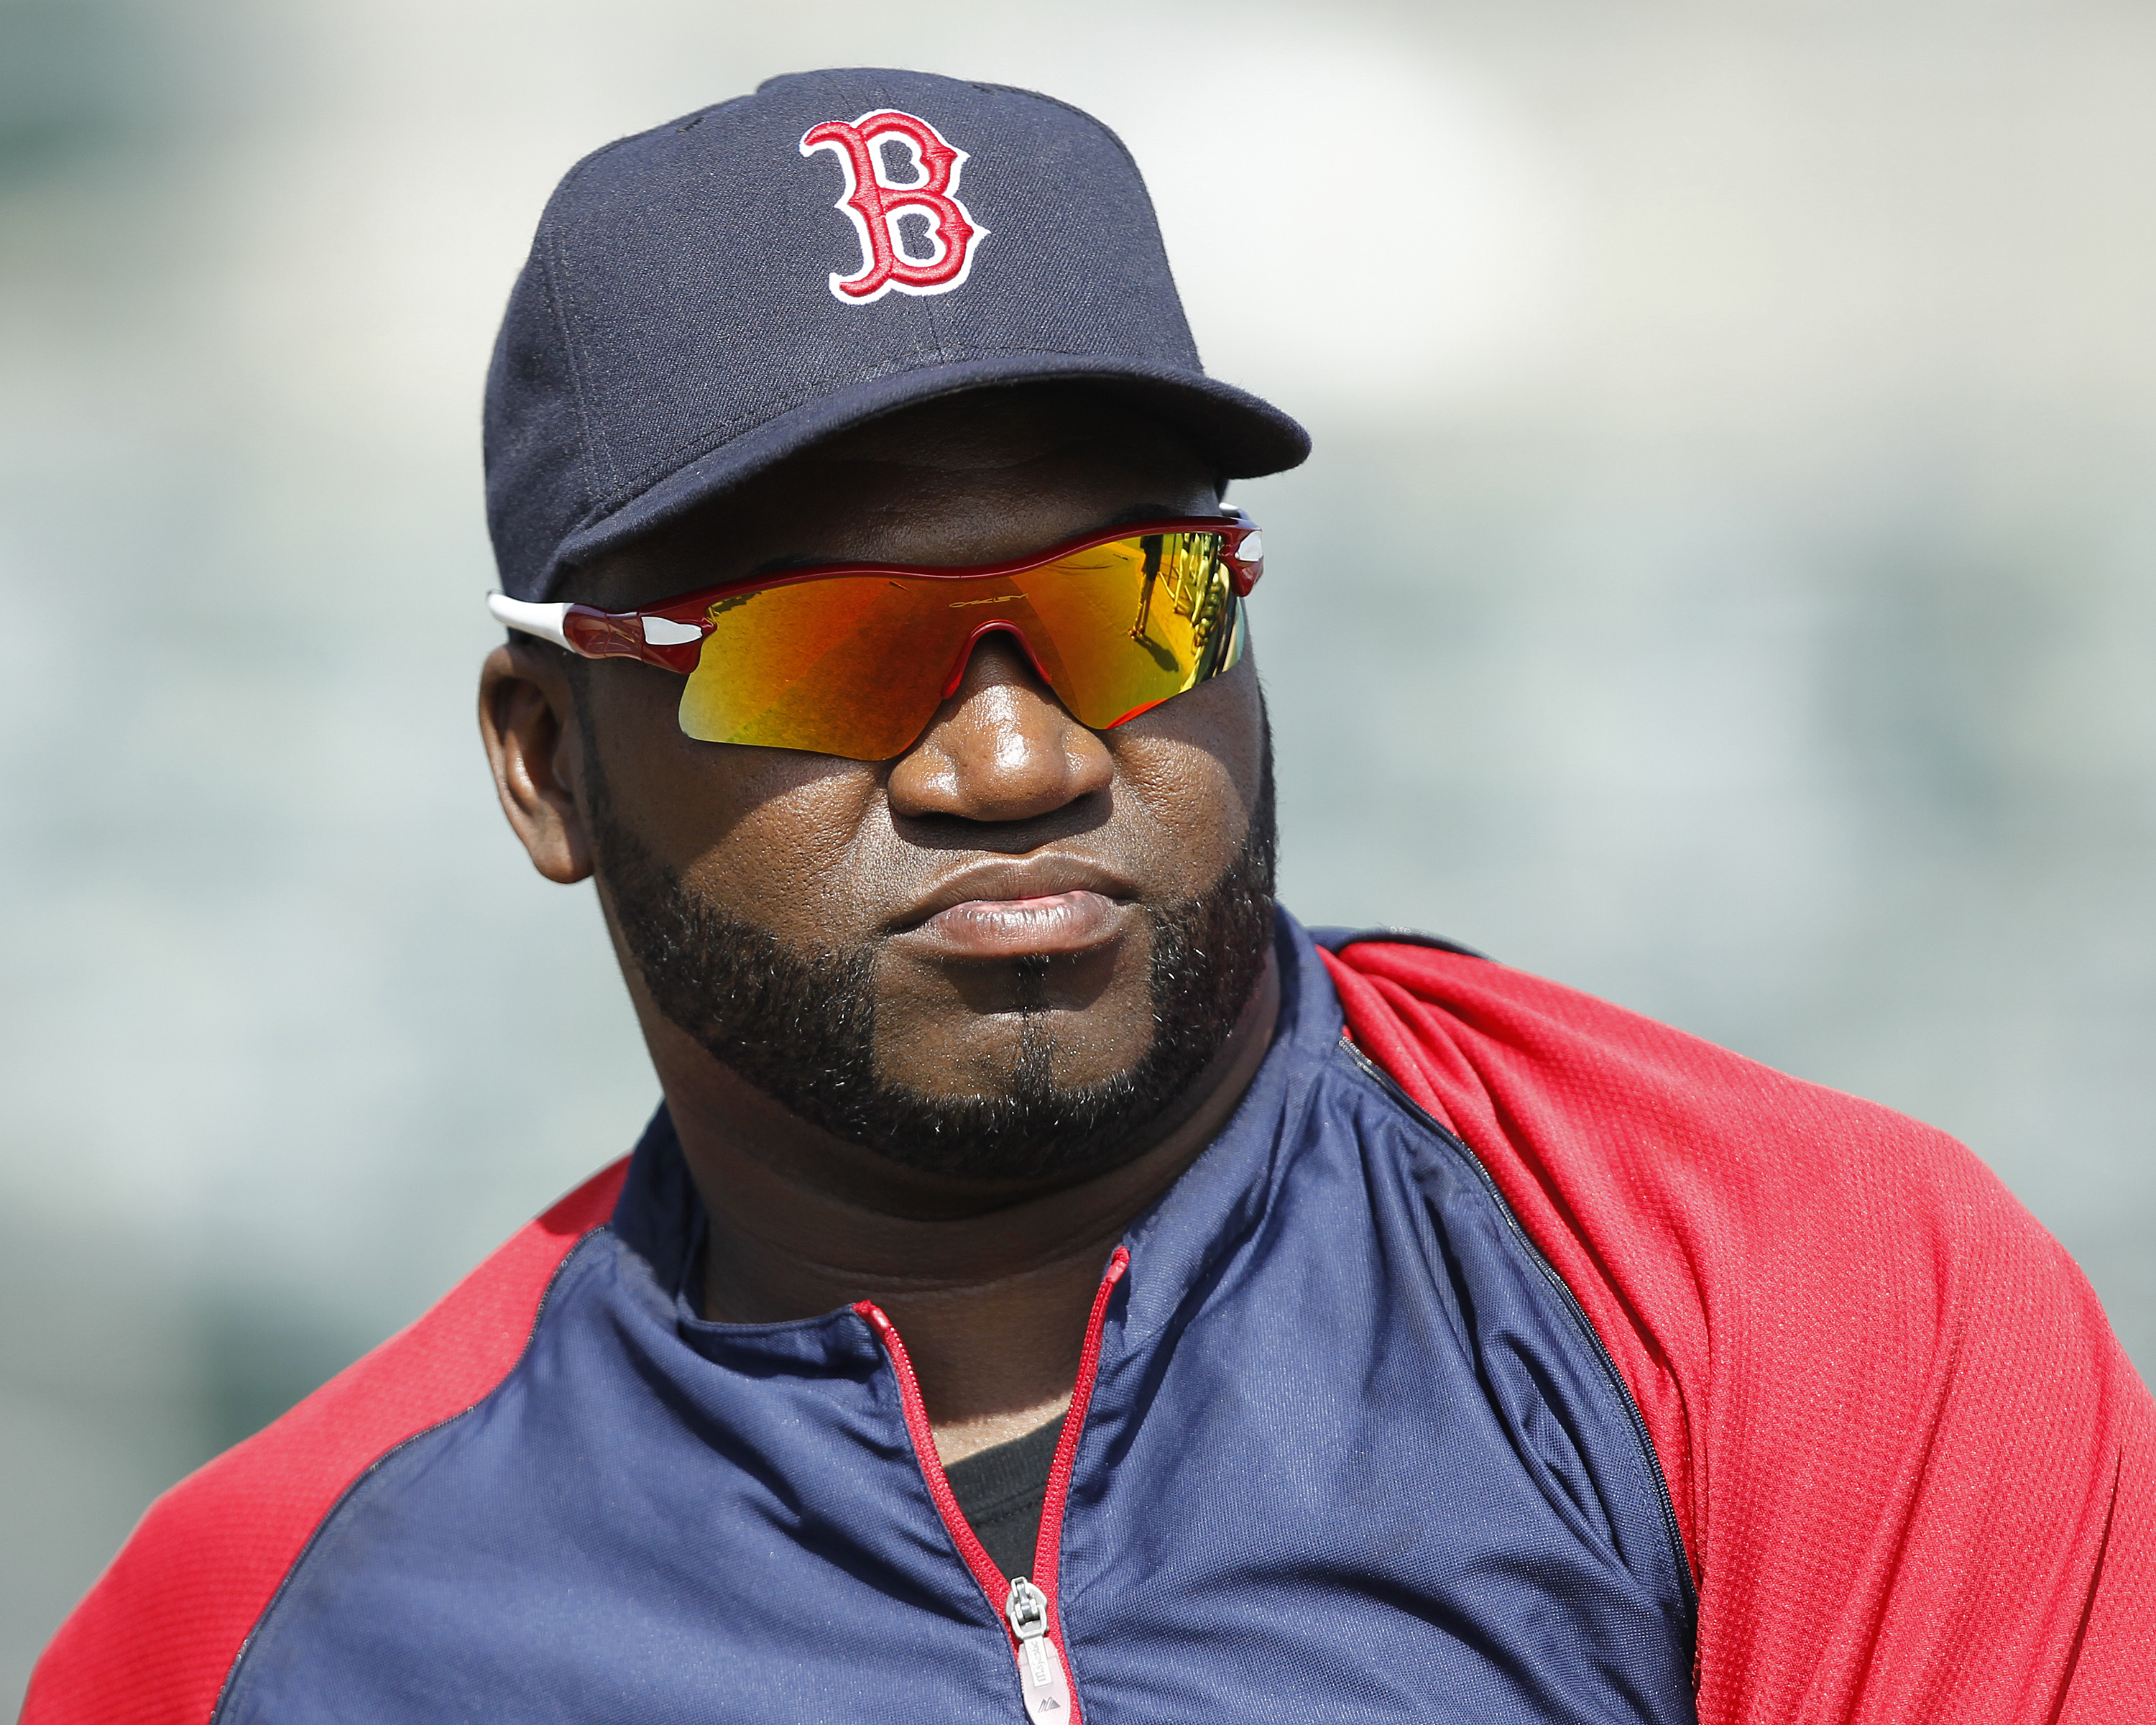 JUPITER, FL - MARCH 24: David Ortiz #34 of the Boston Red Sox warms up prior to the game against the Florida Marlins at Roger Dean Stadium on March 24, 2011 in Jupiter, Florida. (Photo by Joel Auerbach/Getty Images)